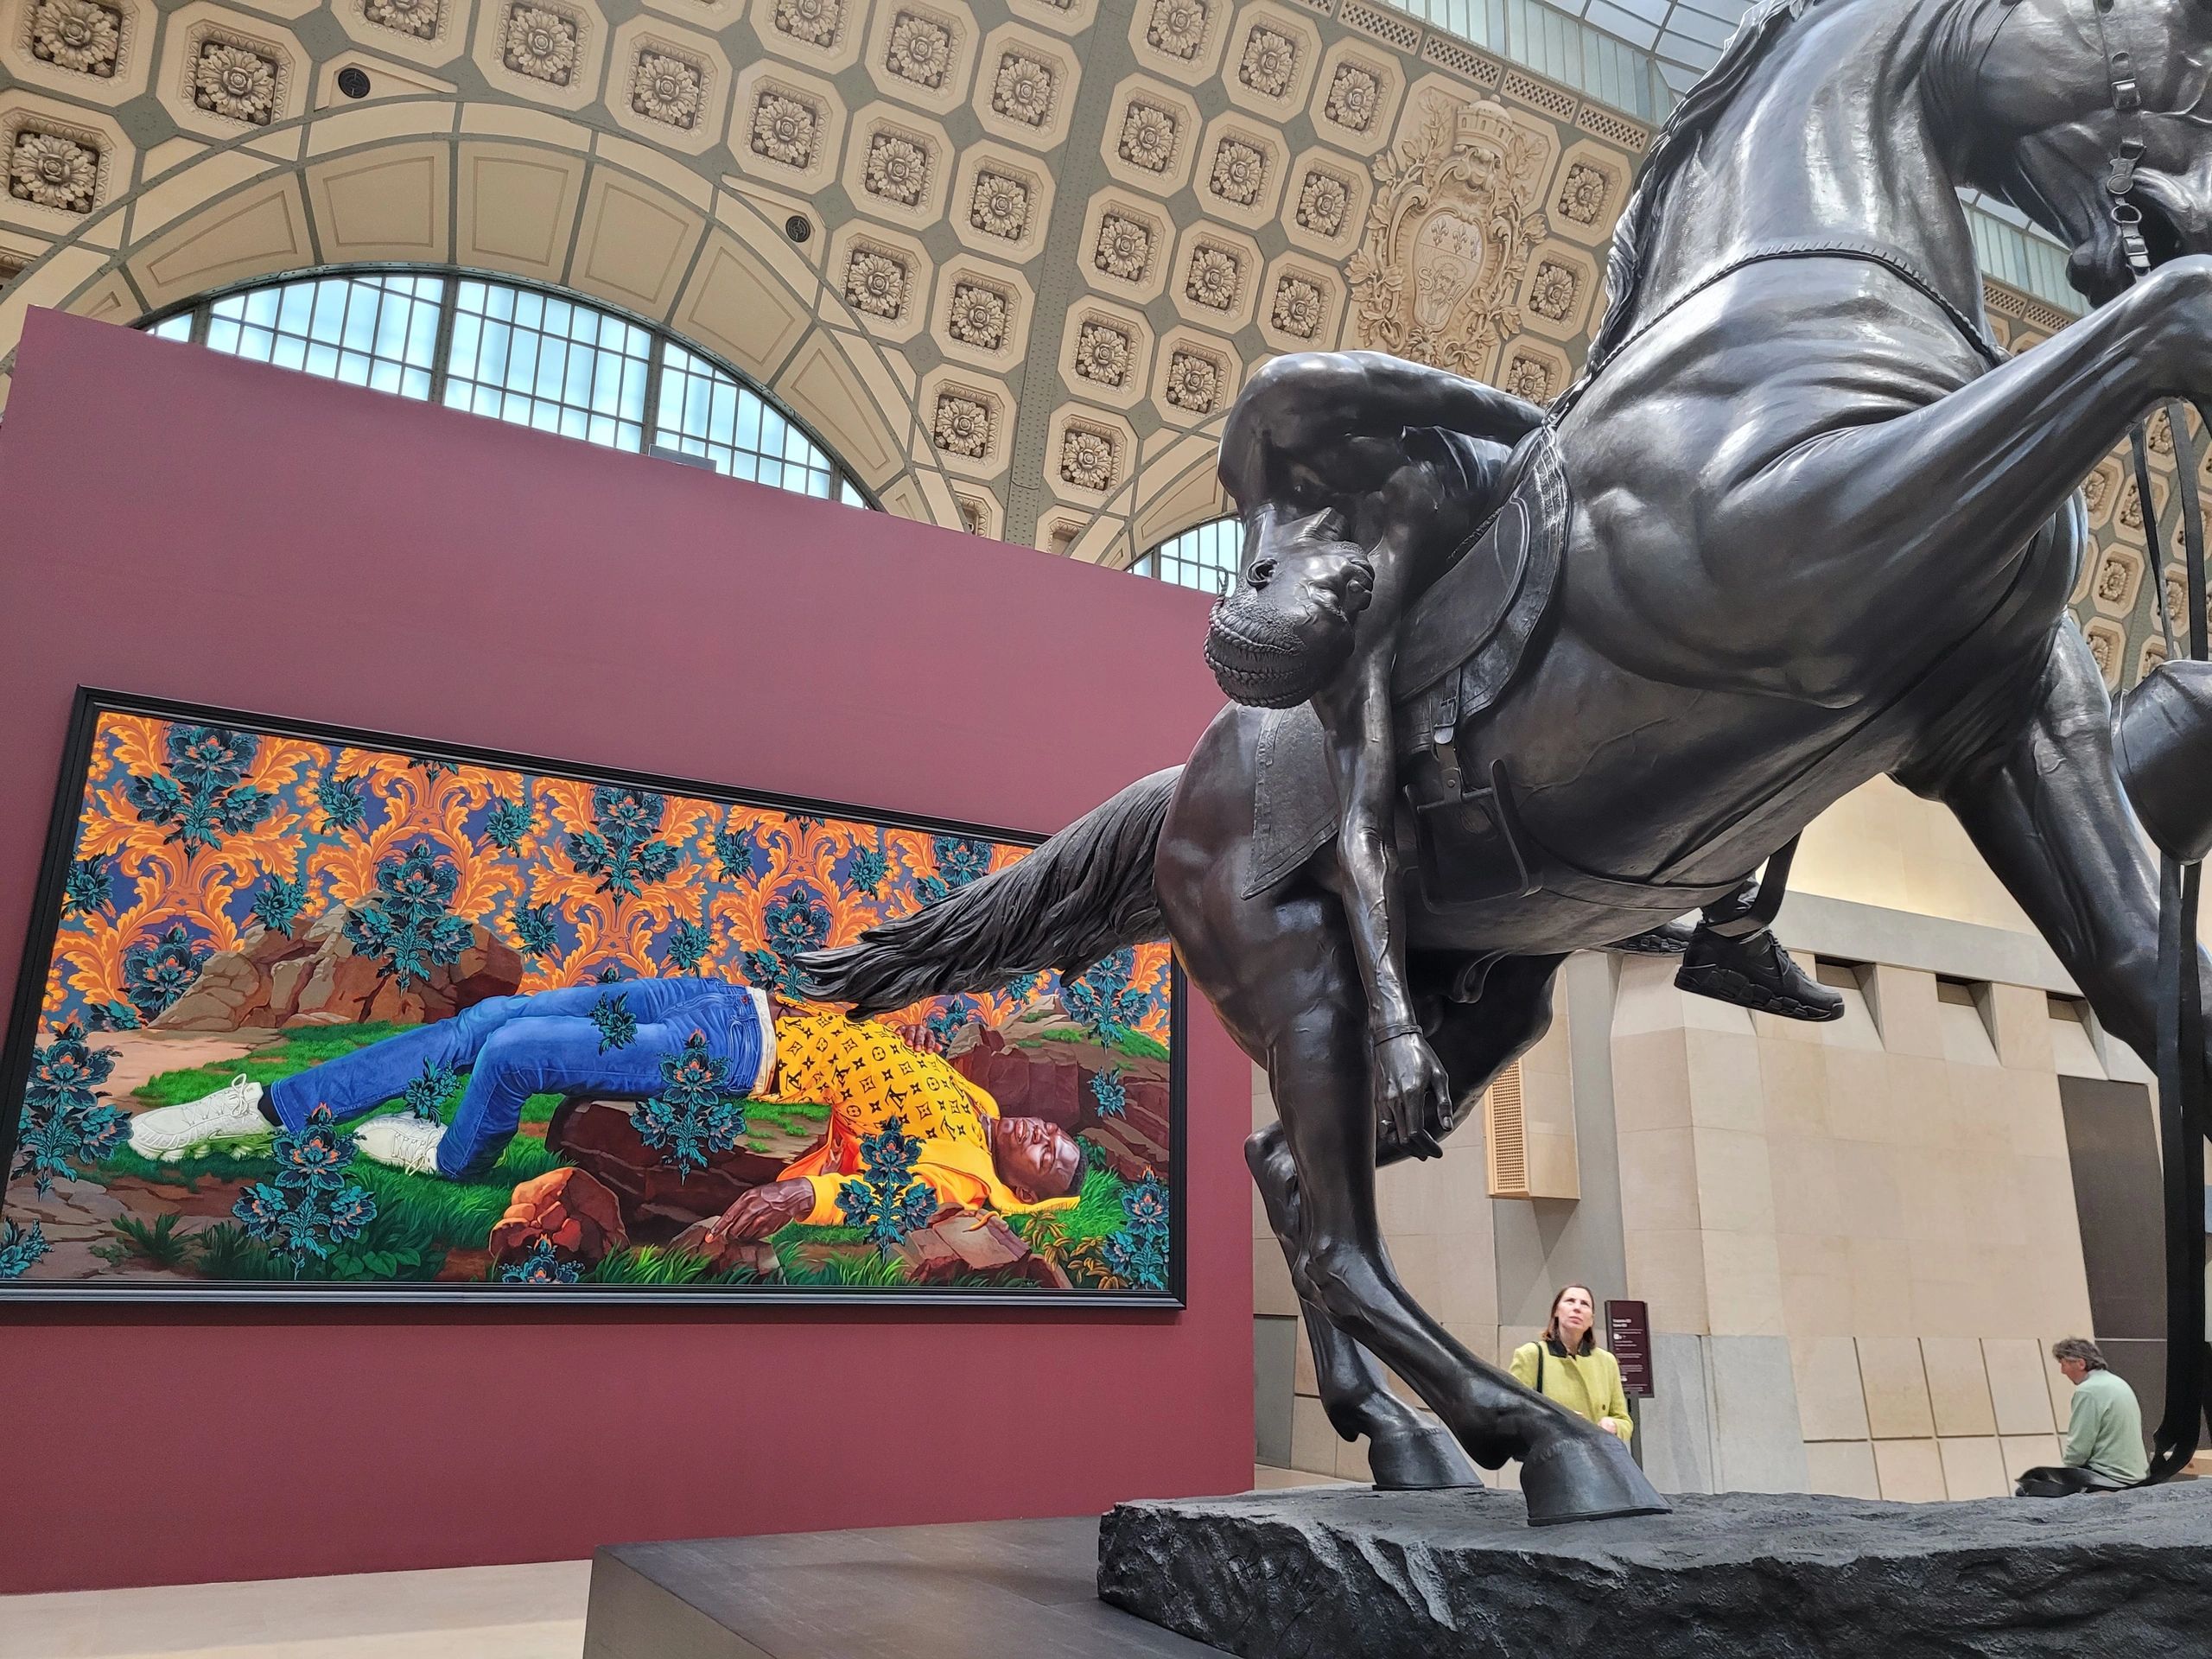 Louis Vuitton shows playful, French styles at Musee d'Orsay in Paris